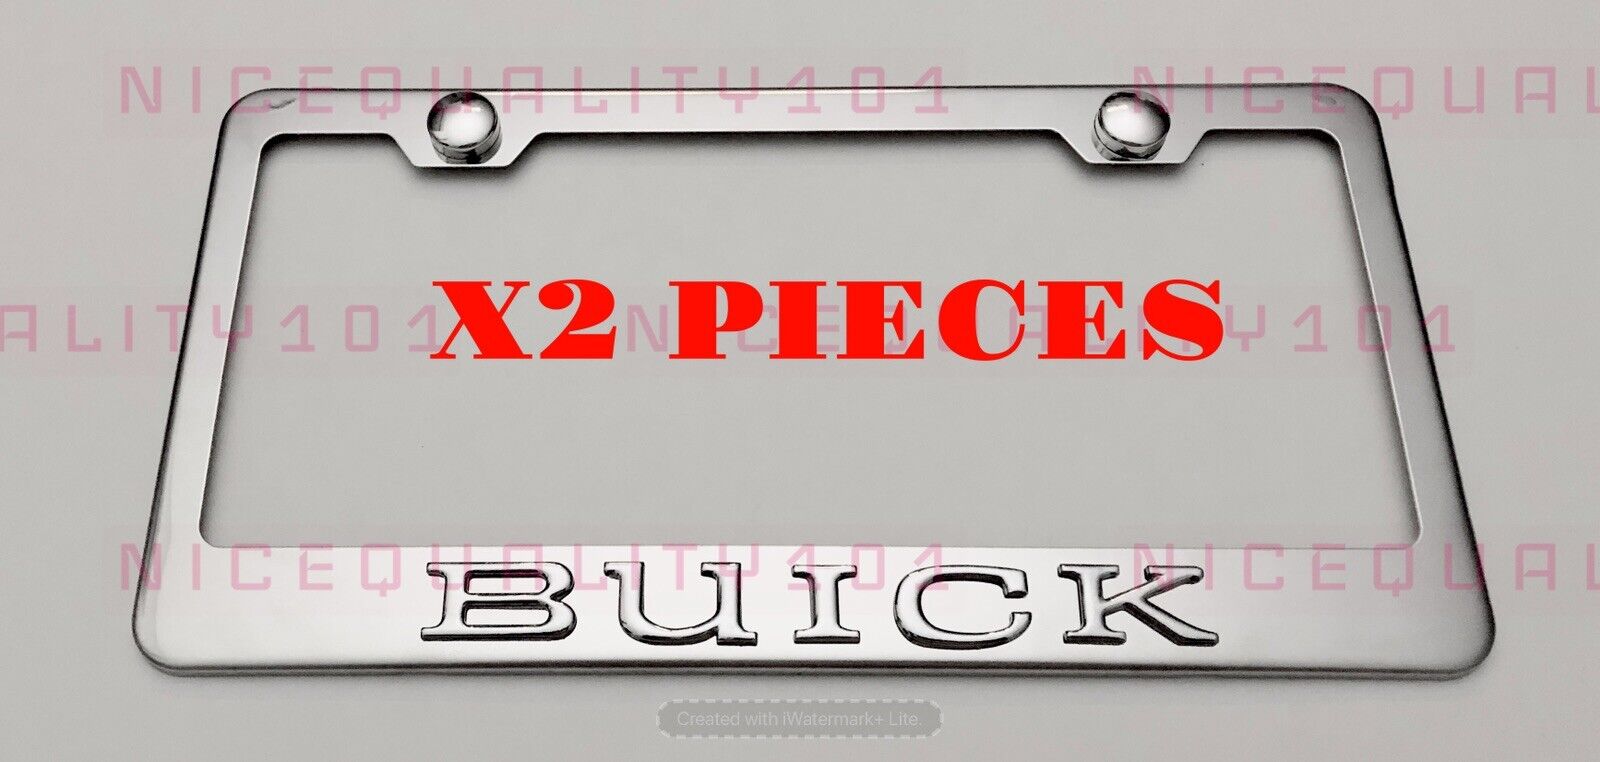 2x 3D Buick Stainless Steel Metal Chrome Mirror License Plate Frame Holder